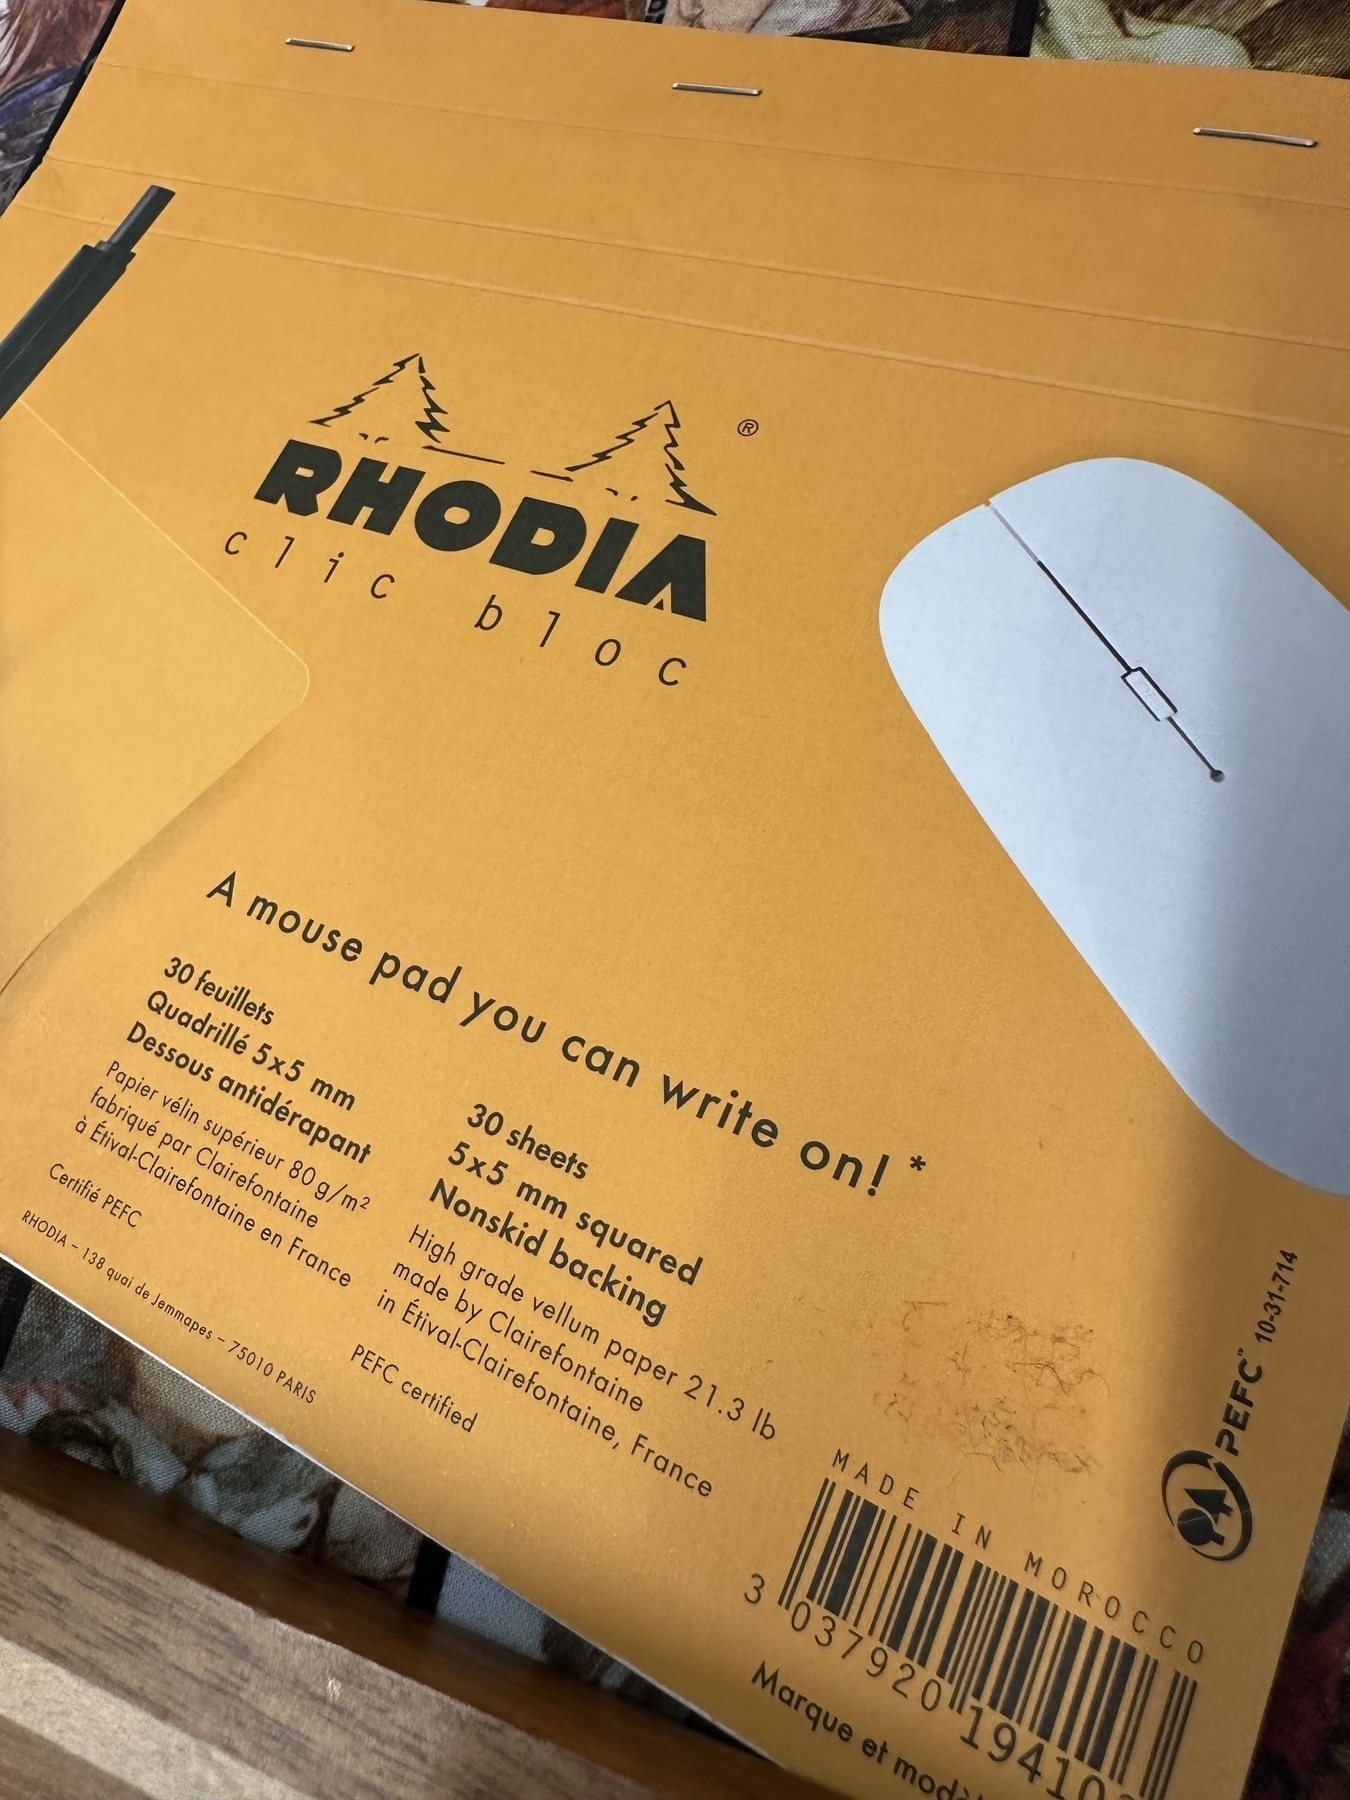 A mouse pad-sized Rhodia notebook that says “A mouse pad you can write on!”